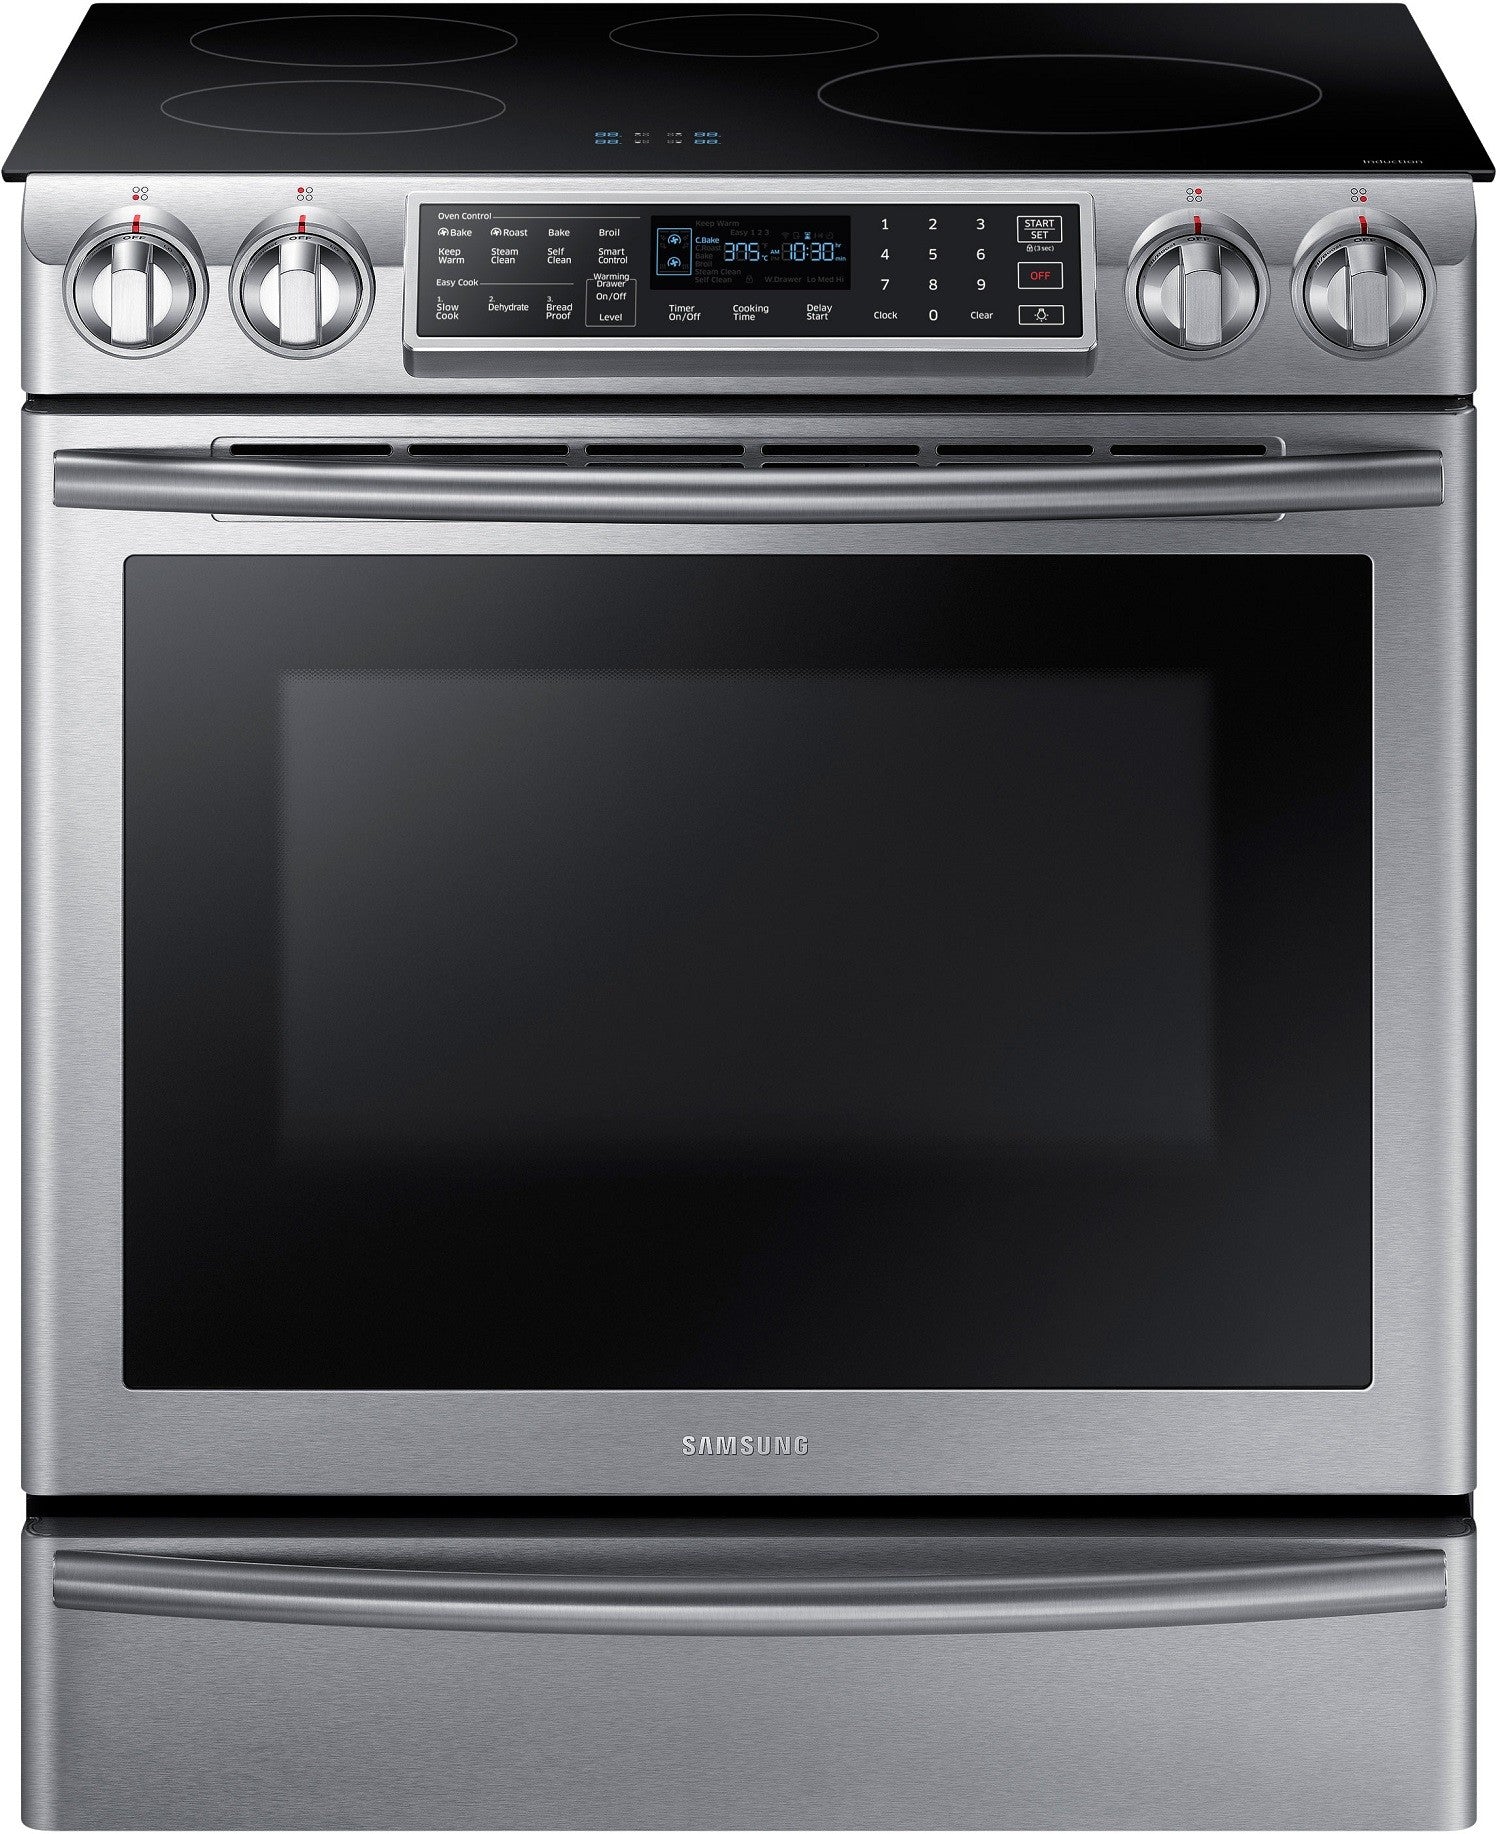 Samsung NE58K9560WS/AC 5.8 Cu. Ft. Electric Induction Self-cleaning Slide-in Smart Range With Convection - Stainless Steel